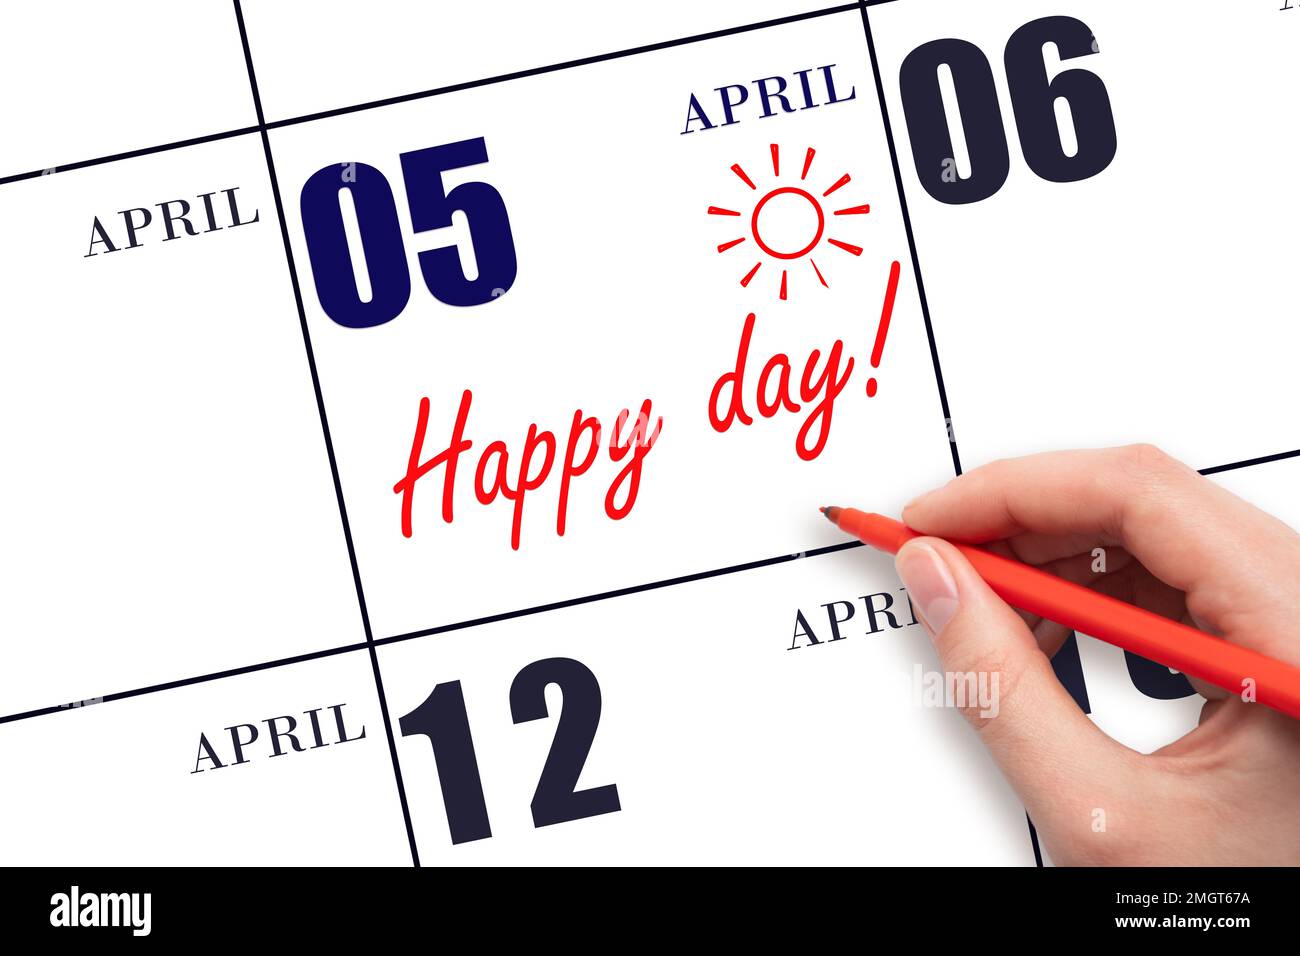 5th day of April.  Hand writing the text HAPPY DAY and drawing the sun on the calendar date April 5. Save the date. Holiday. Motivation. Spring month, Stock Photo